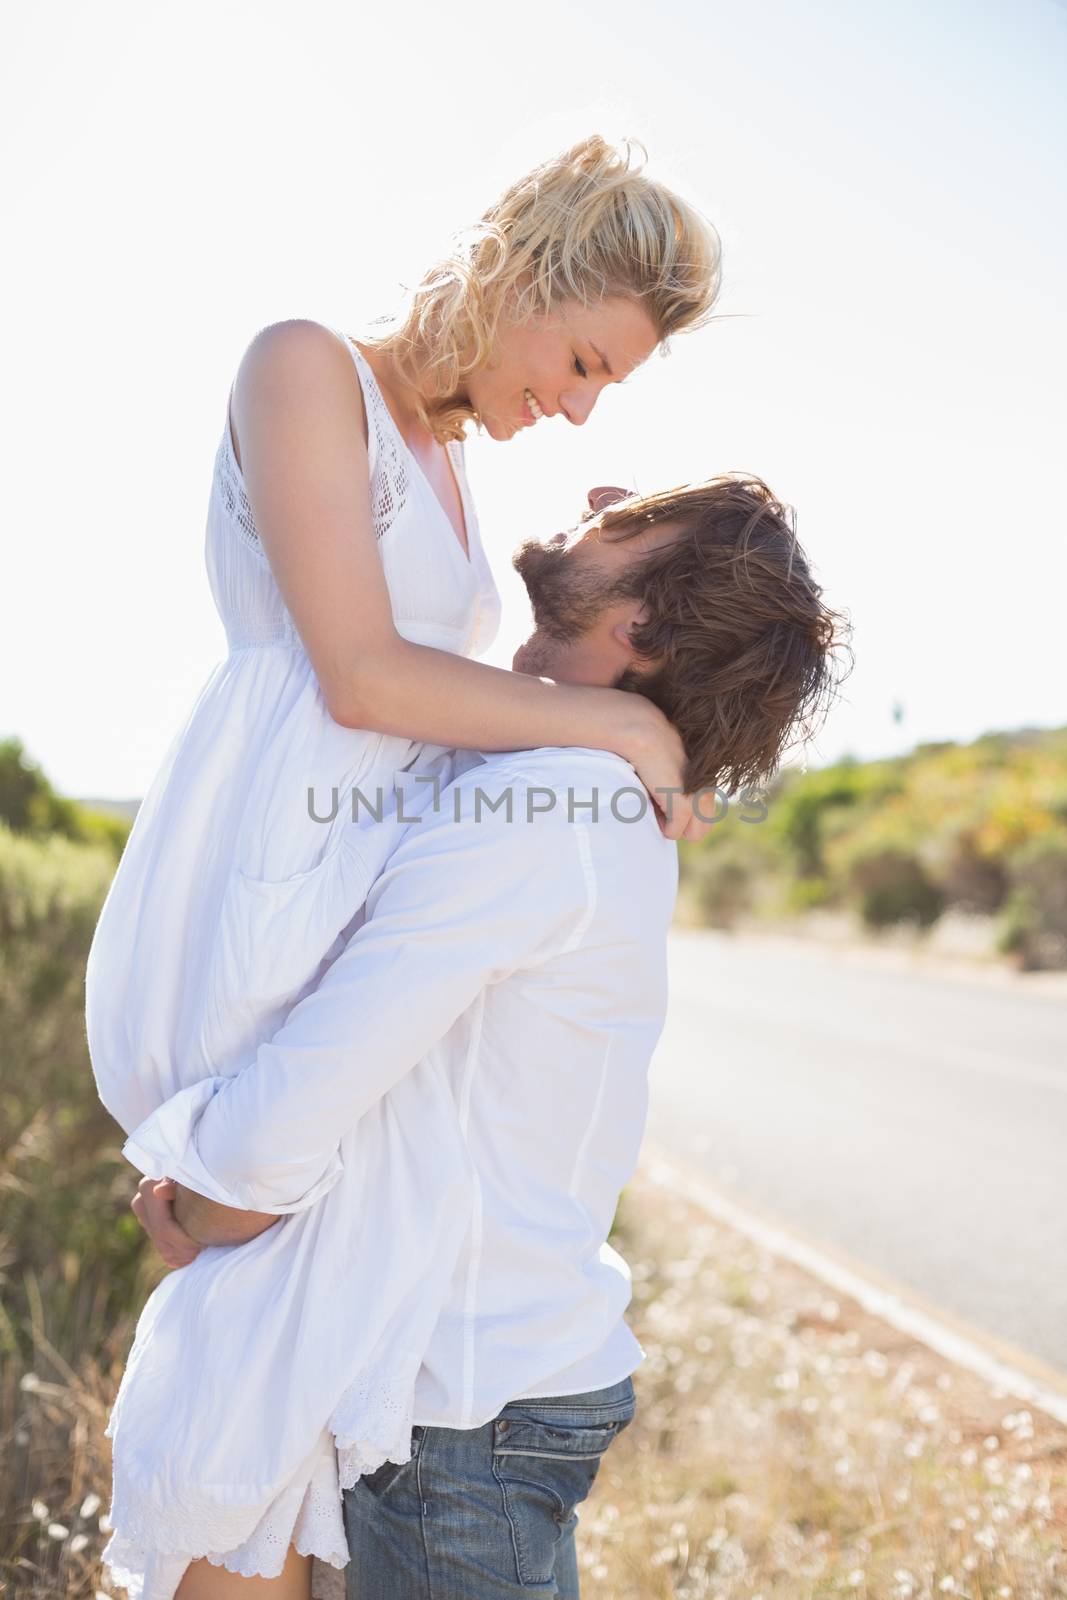 Attractive man lifting up his girlfriend by Wavebreakmedia